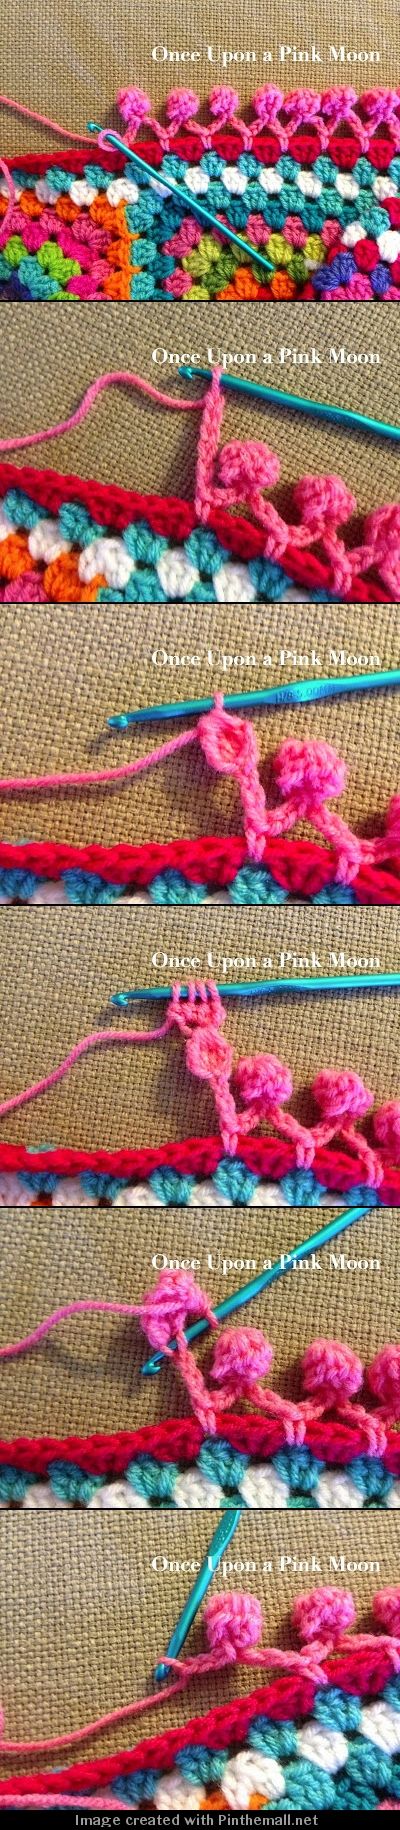 tiny crochet pompoms on a chain edge – full instructions – clever and so cute! -…